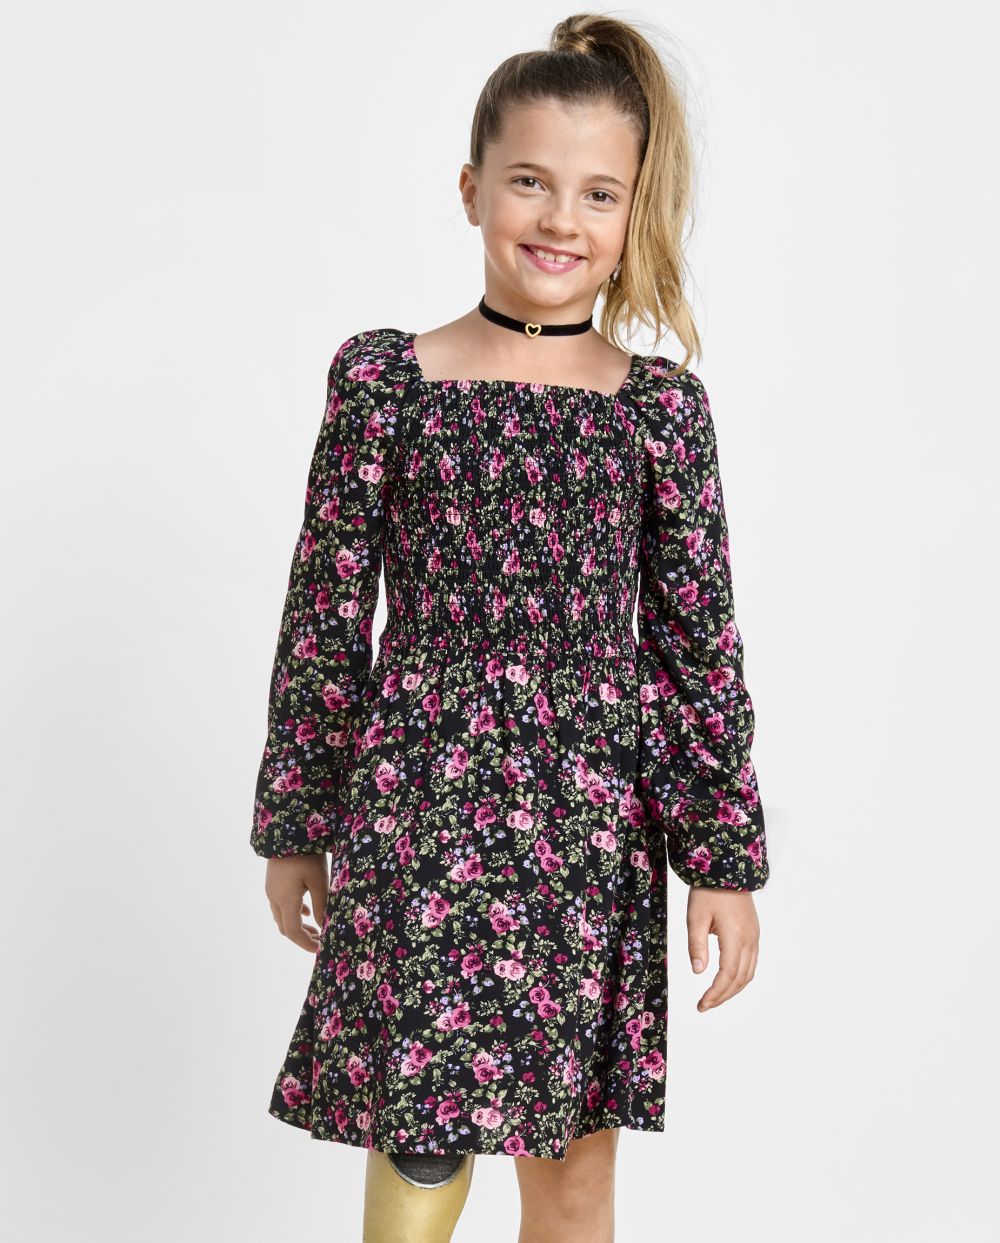 Girls Long Sleeves Above the Knee Rayon Smocked Square Neck Floral Print Dress